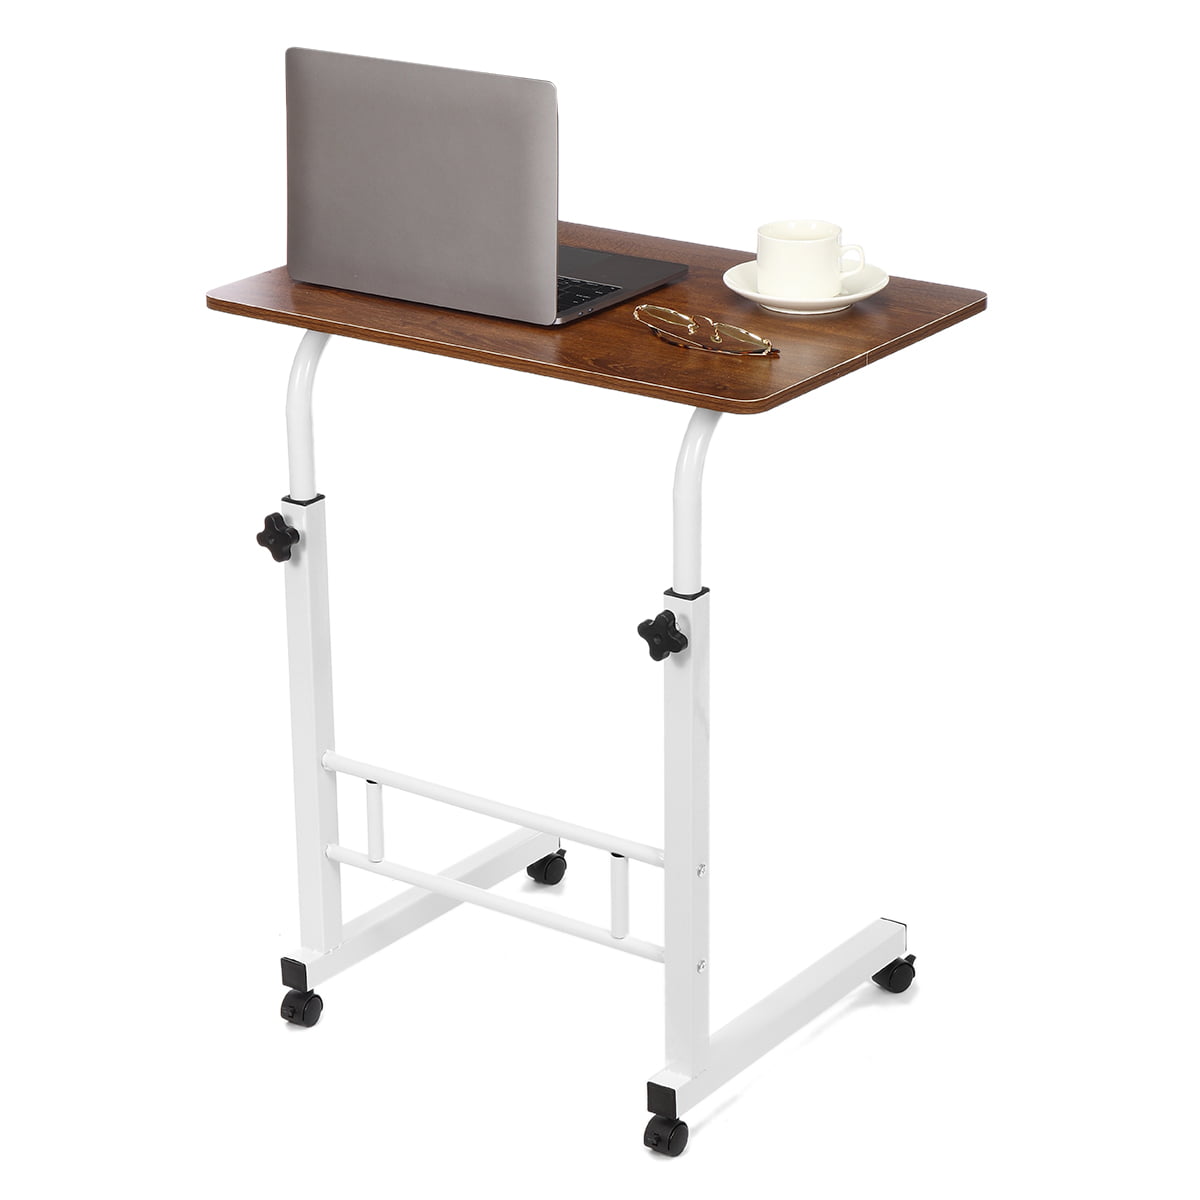 Details about   Portable Large Size Rolling Desk Adjustable Laptop Notebook Table Stand Overbed 